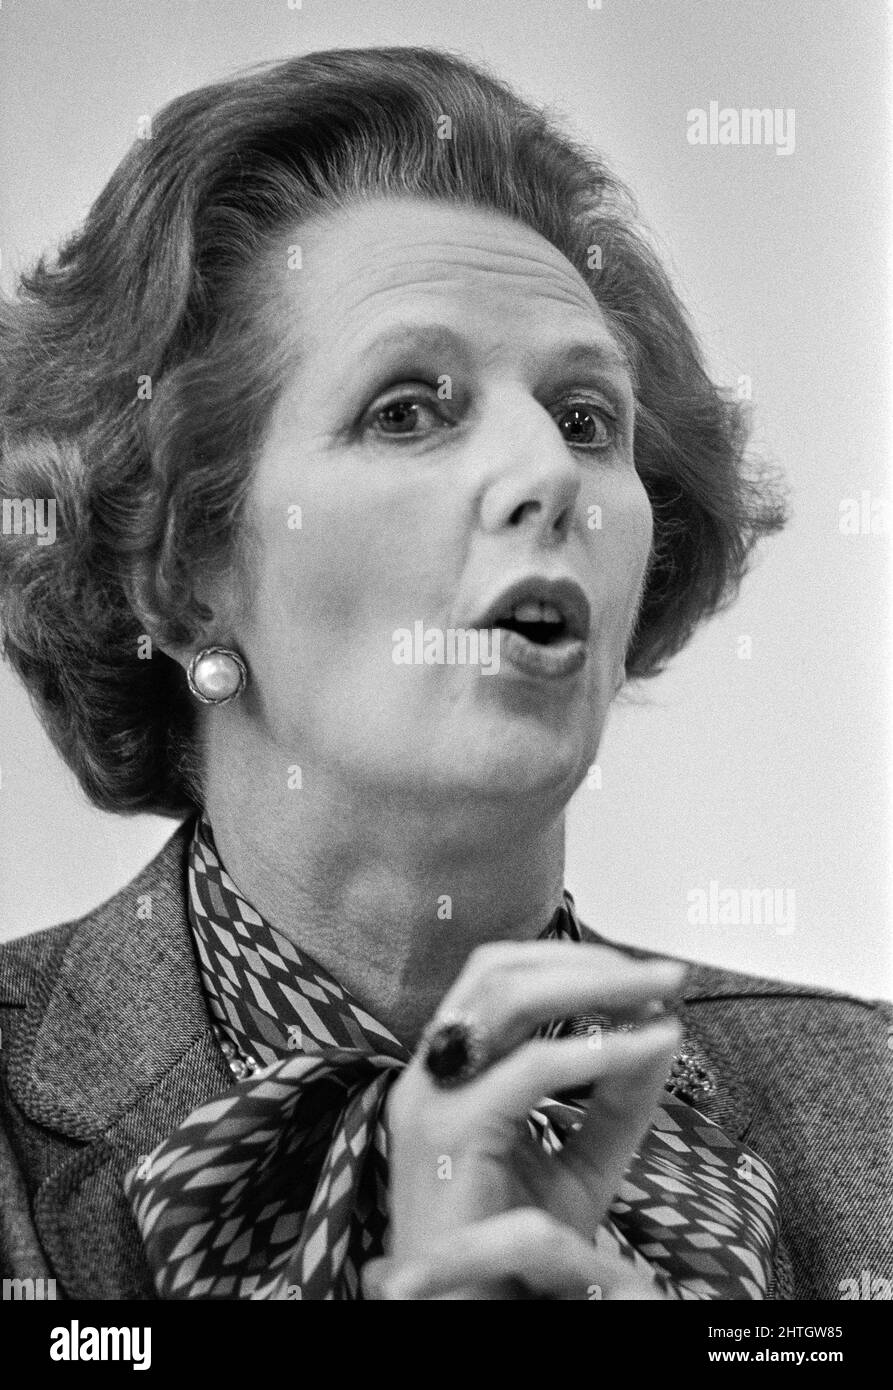 British Prime Minister Margaret Thatcher (1925-2013) was the first woman to hold the office of Prime Minister, and was the longest-serving British Prime Minister of the 20th century. Stock Photo